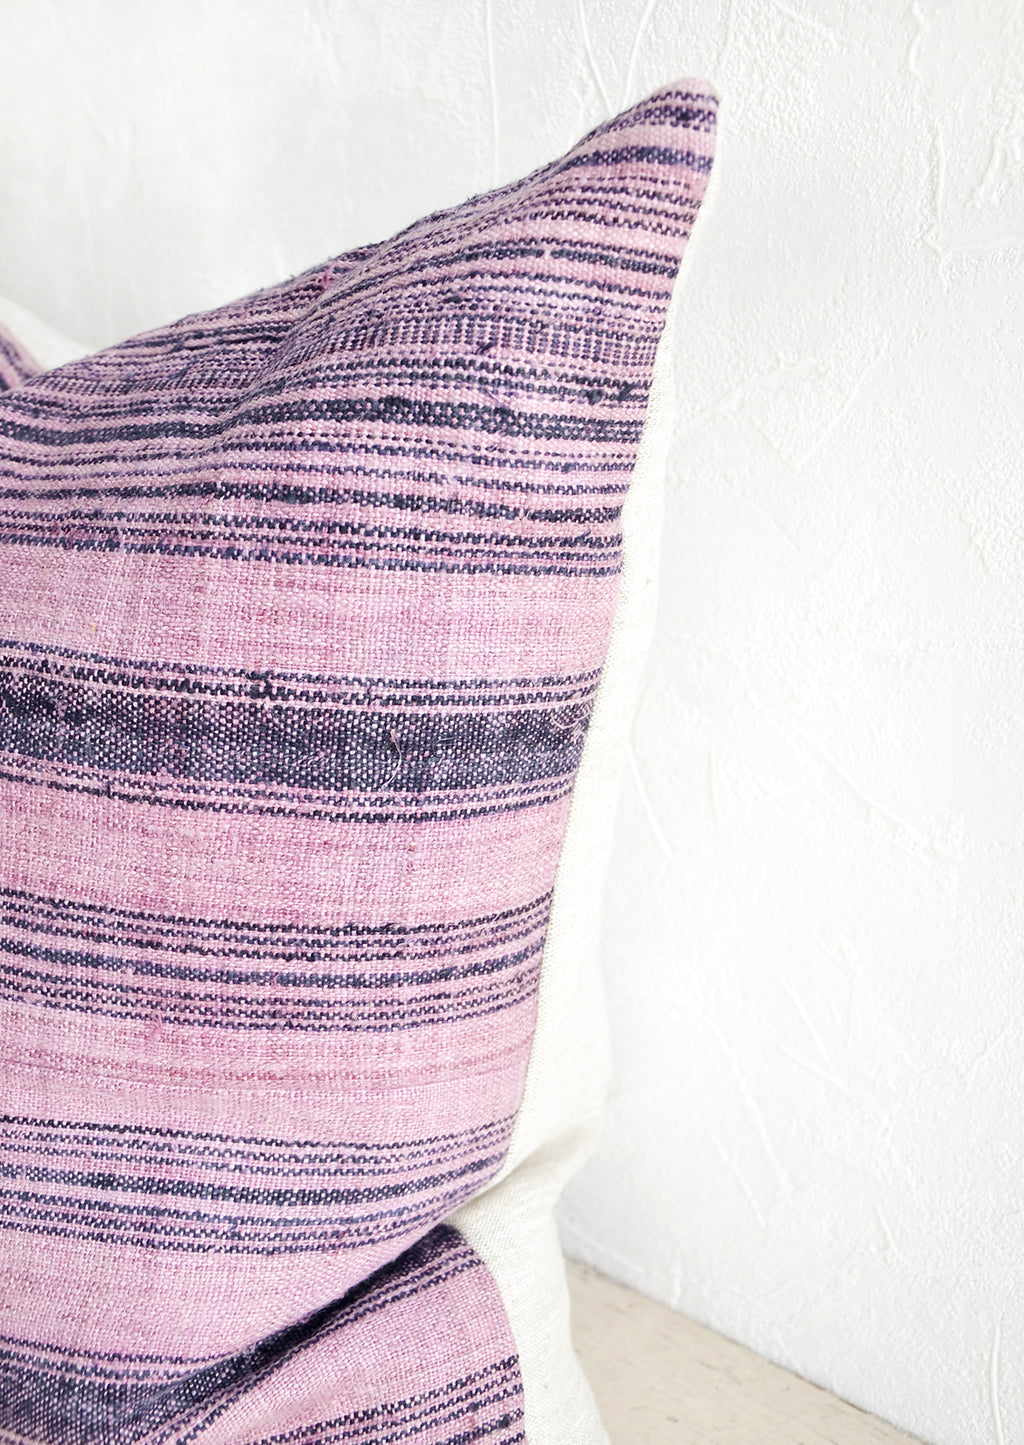 2: Square pillow in striped vintage hemp fabric with natural linen backing